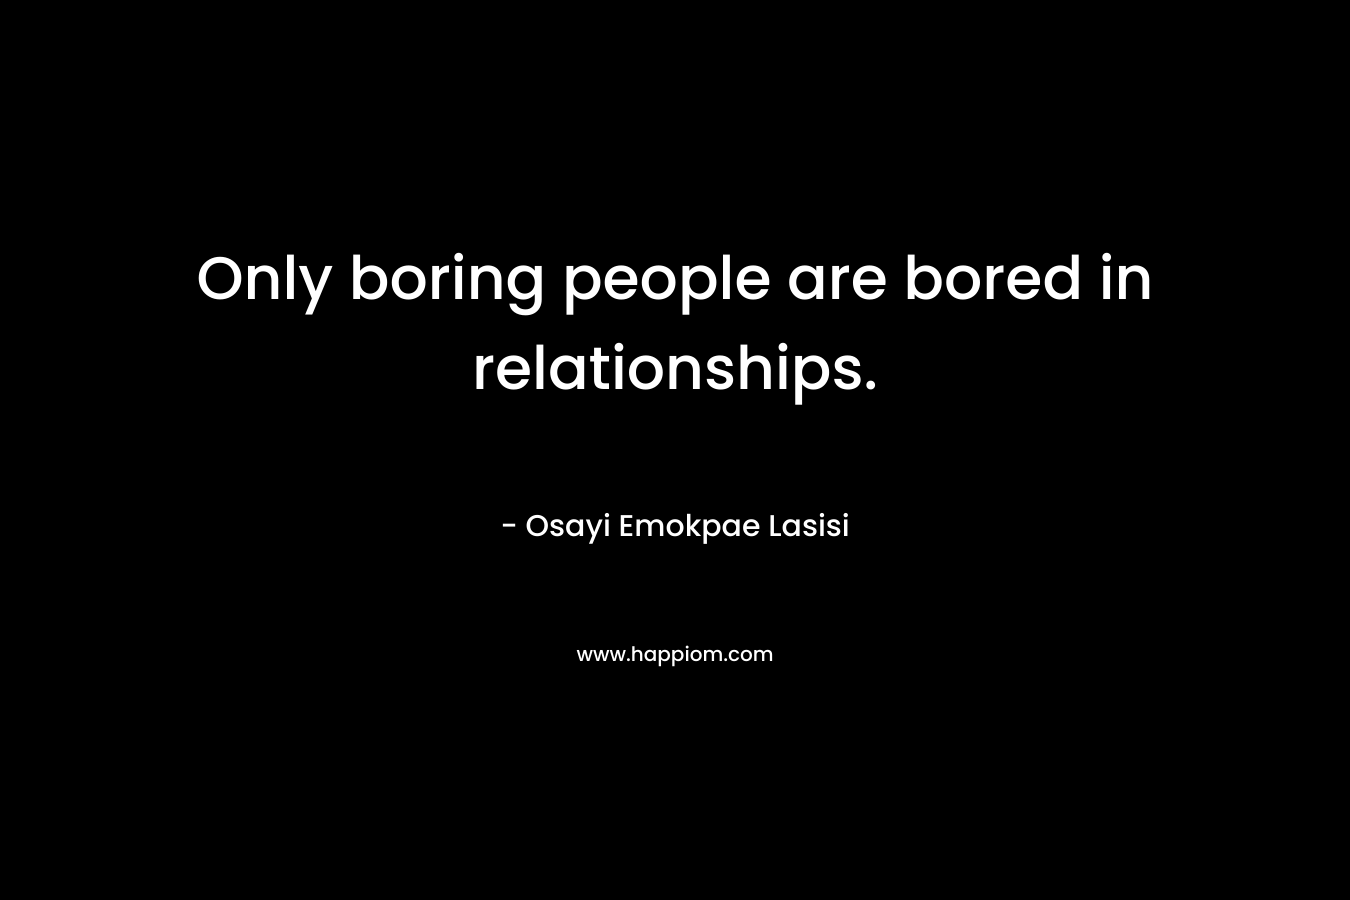 Only boring people are bored in relationships.